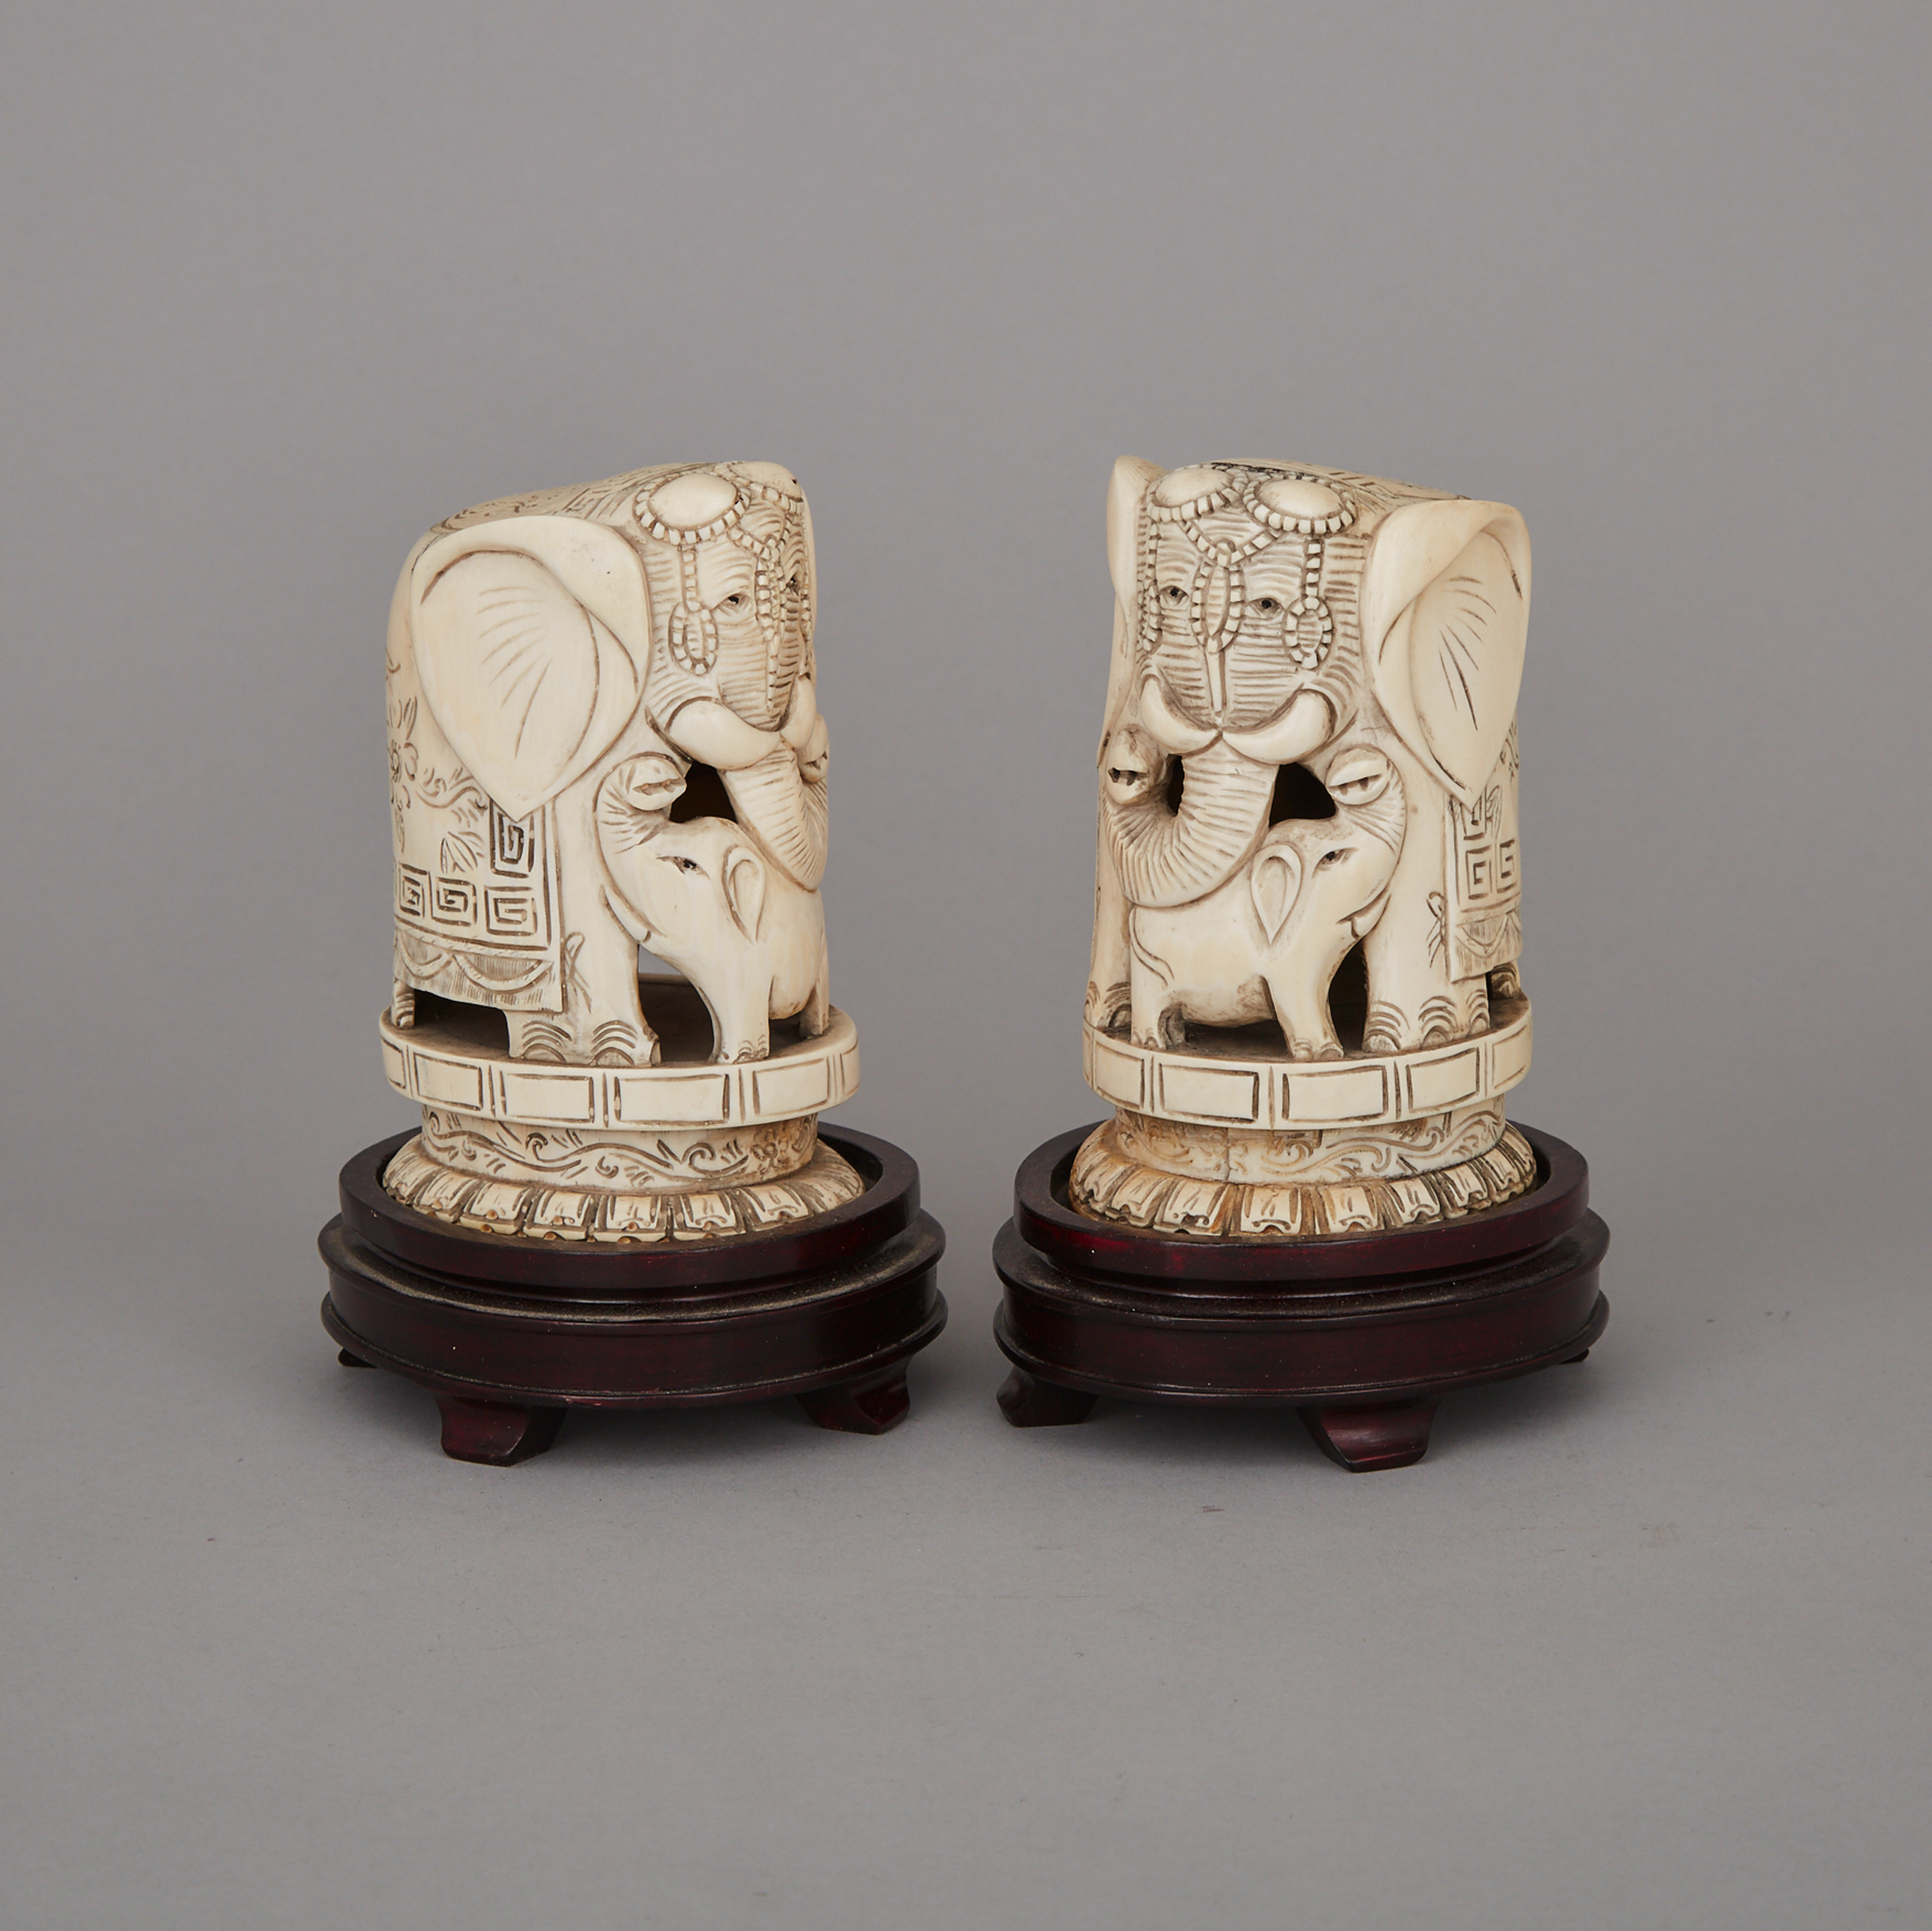 A Pair of Ivory Carved Elephants, Late 19th Century